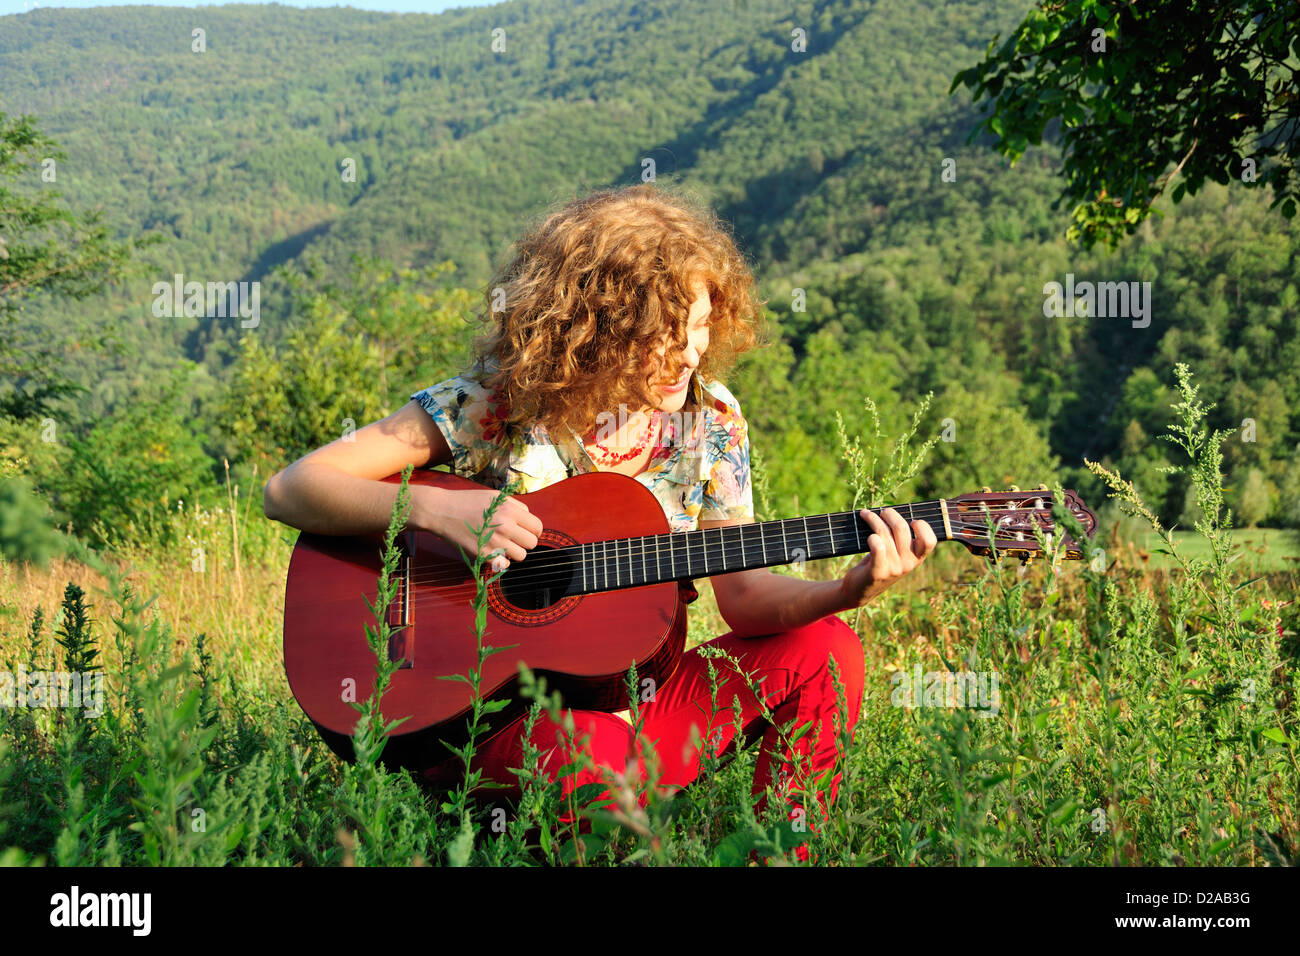 Woman playing guitar in grassy field Stock Photo